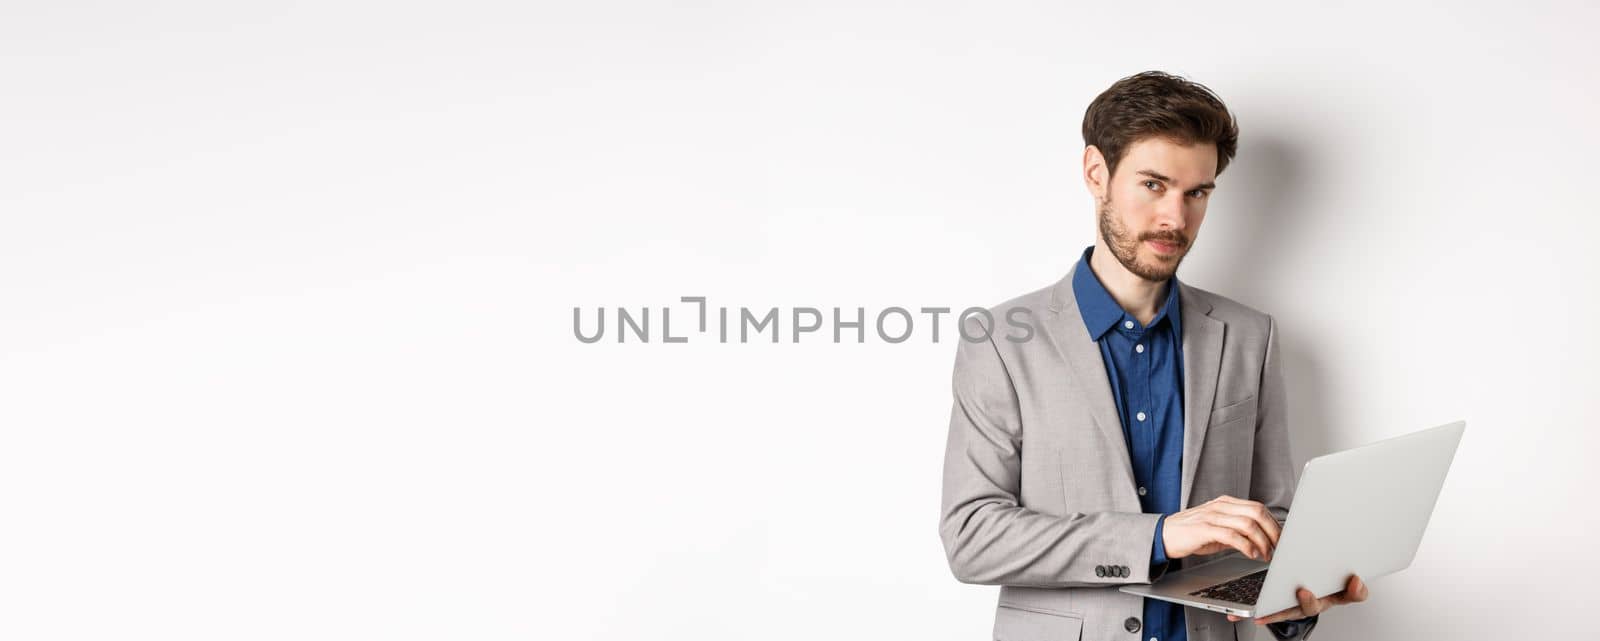 Handsome businessman in suit working on laptop, looking at camera confident, standing against white background.